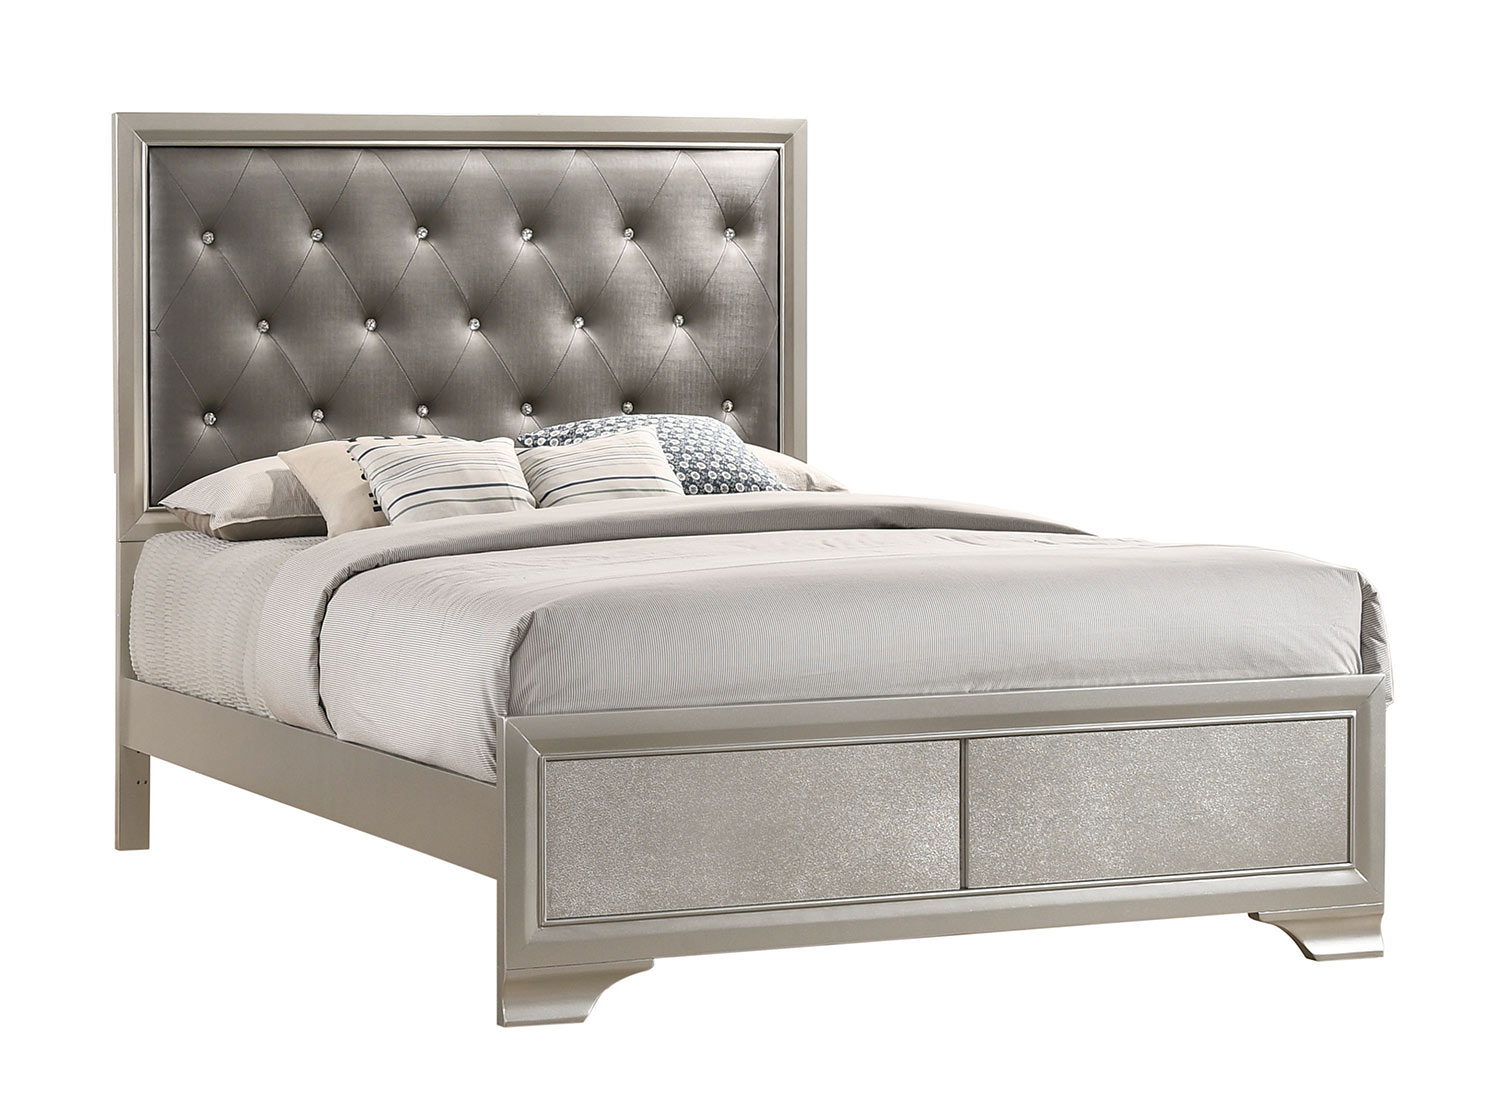 Coaster Salford Bed - Metallic Sterling/Charcoal Grey Leatherette